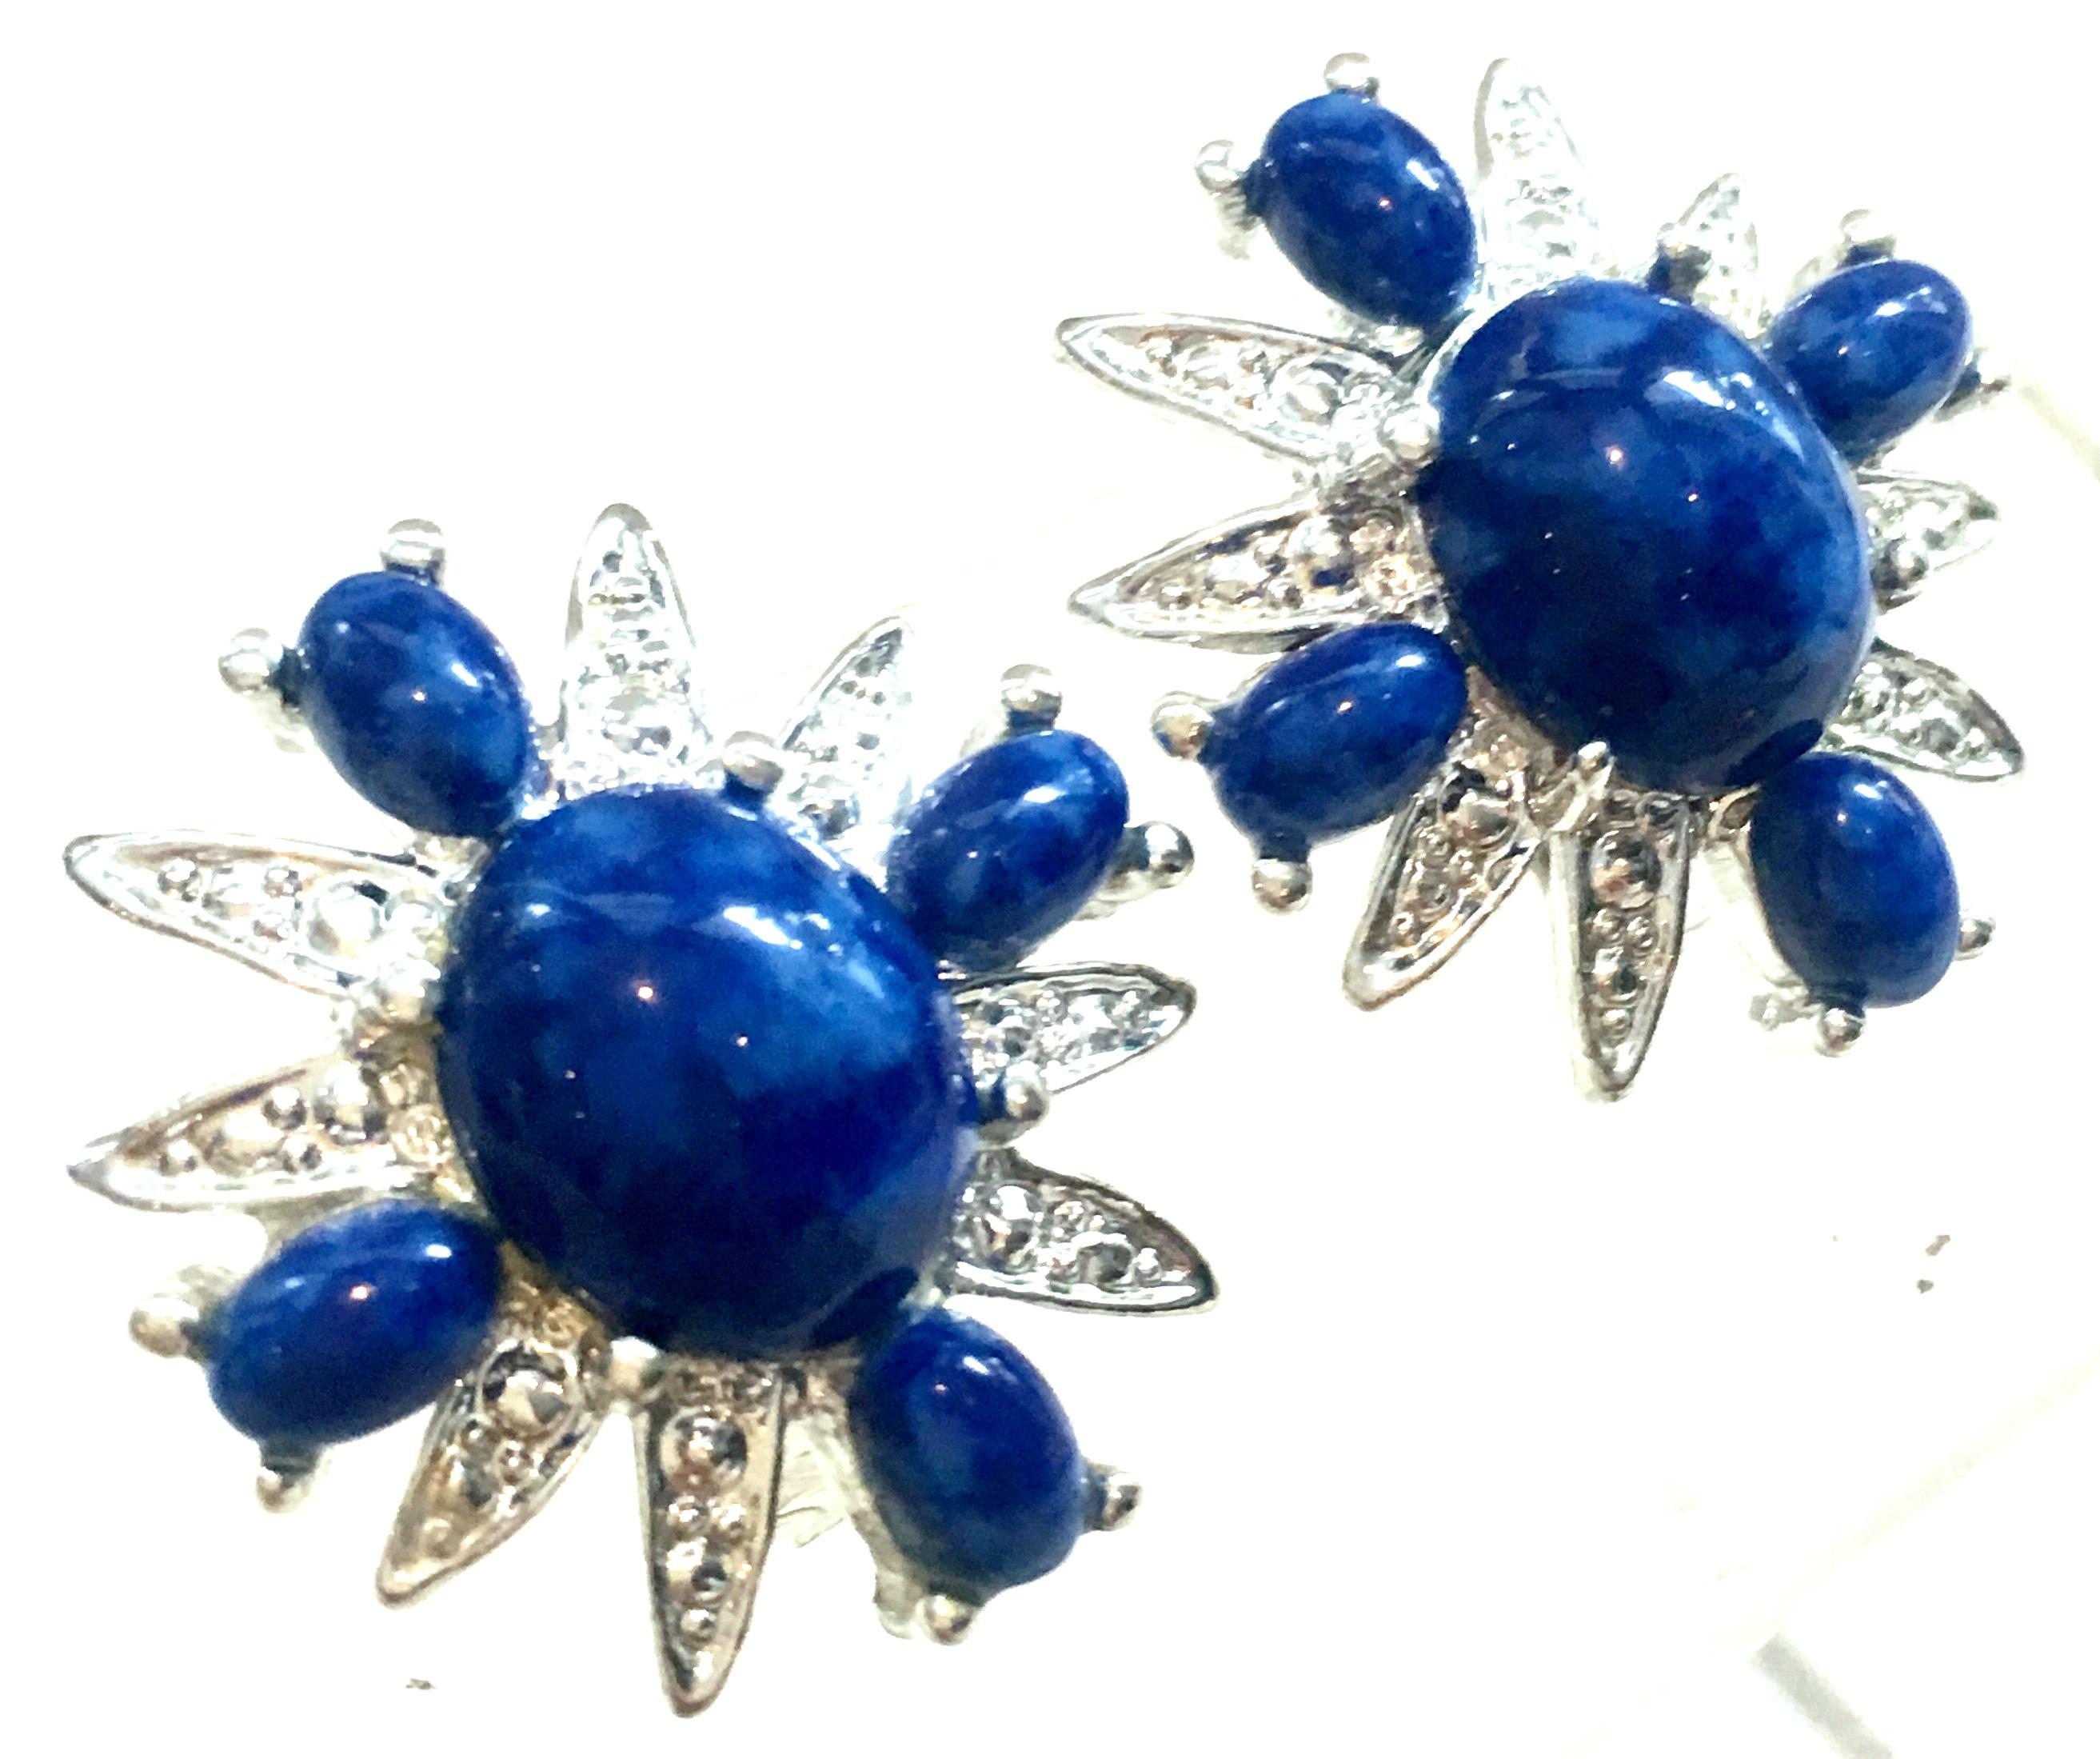 Women's or Men's 20th Century Pair Of Silver & Faux Lapis Lazuli Maltese Earrings By Coventry